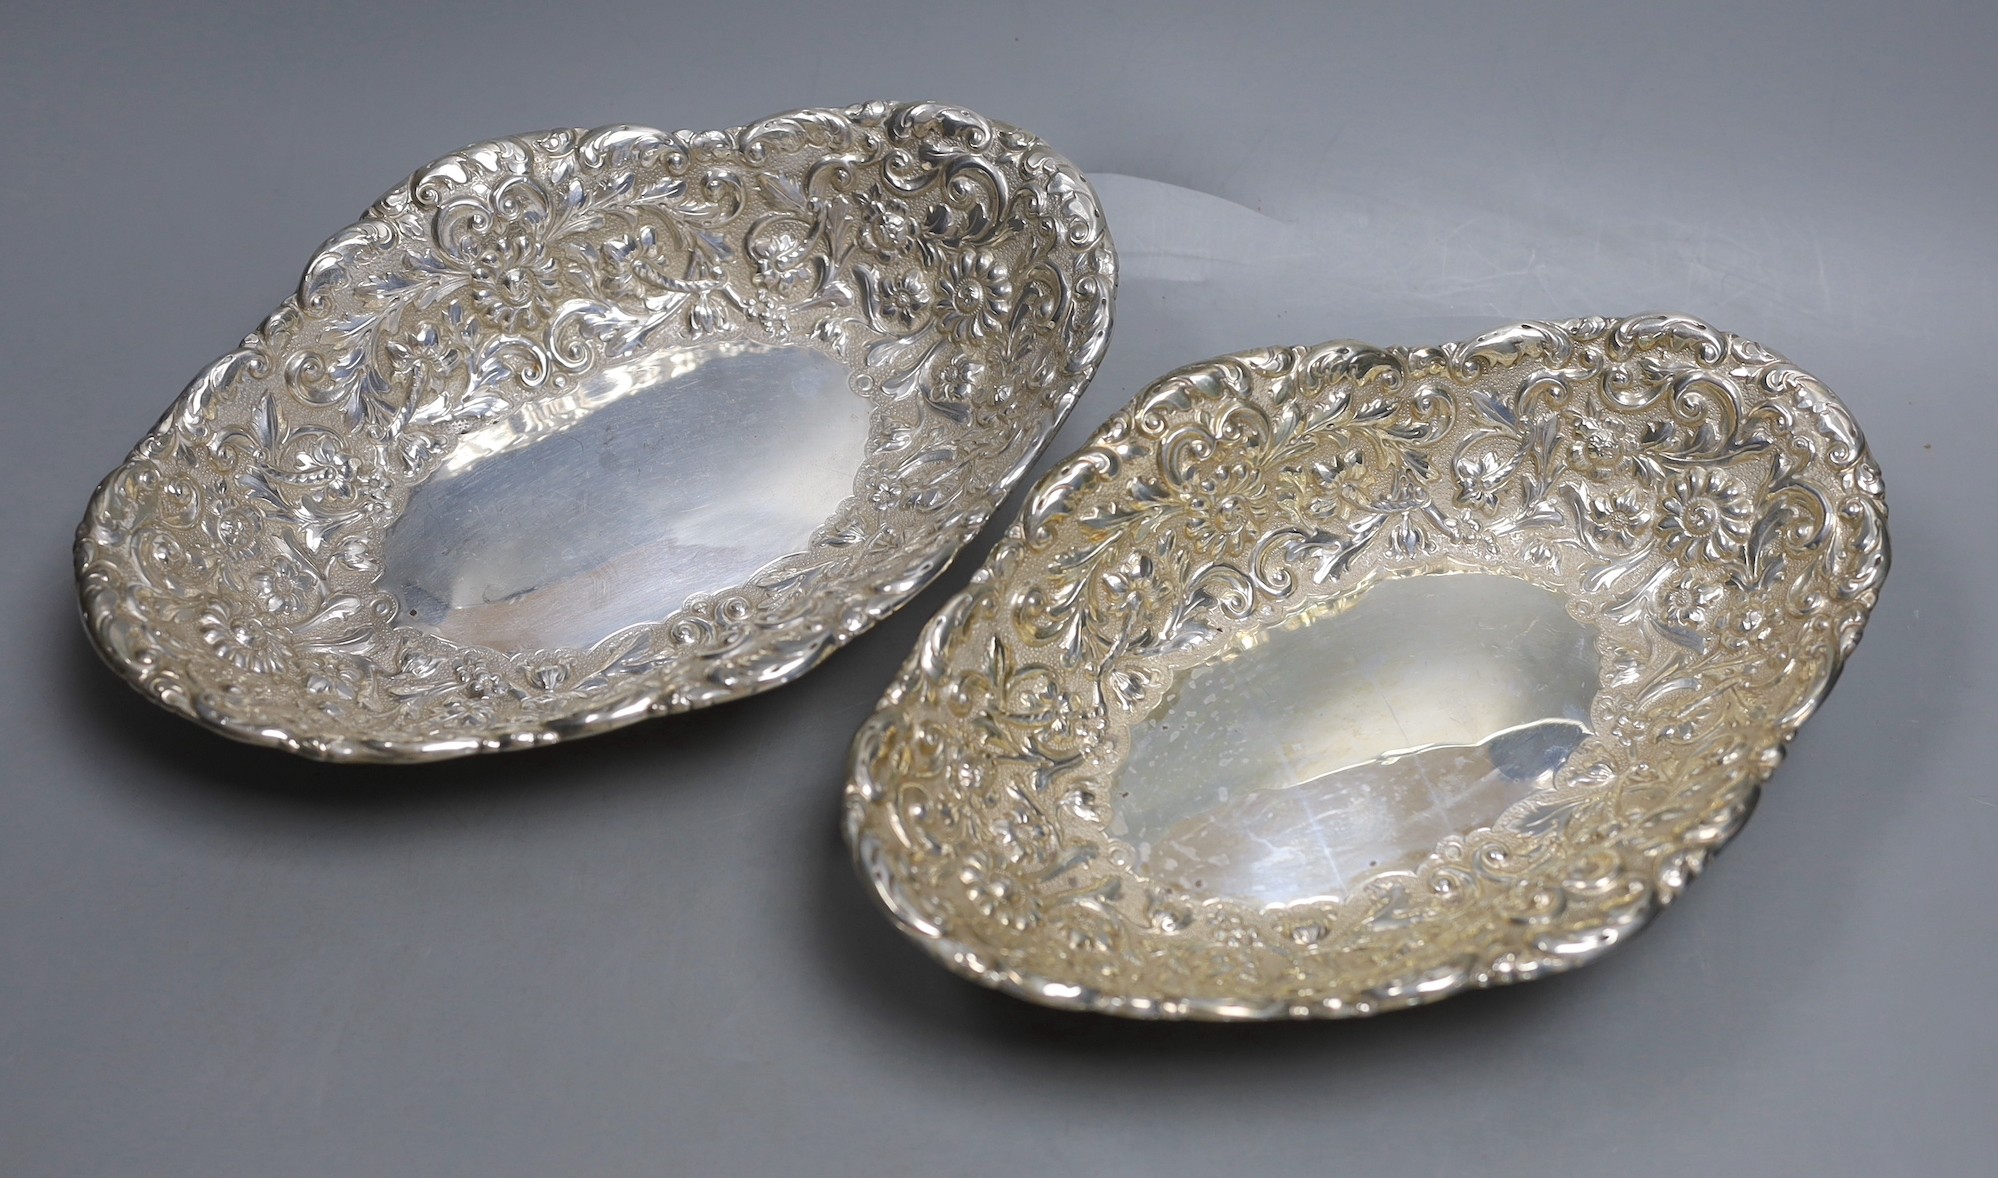 A pair of late Victorian Scottish repousse silver oval dishes, Hamilton & Inches, Edinburgh, 1900, 25cm, 17oz.